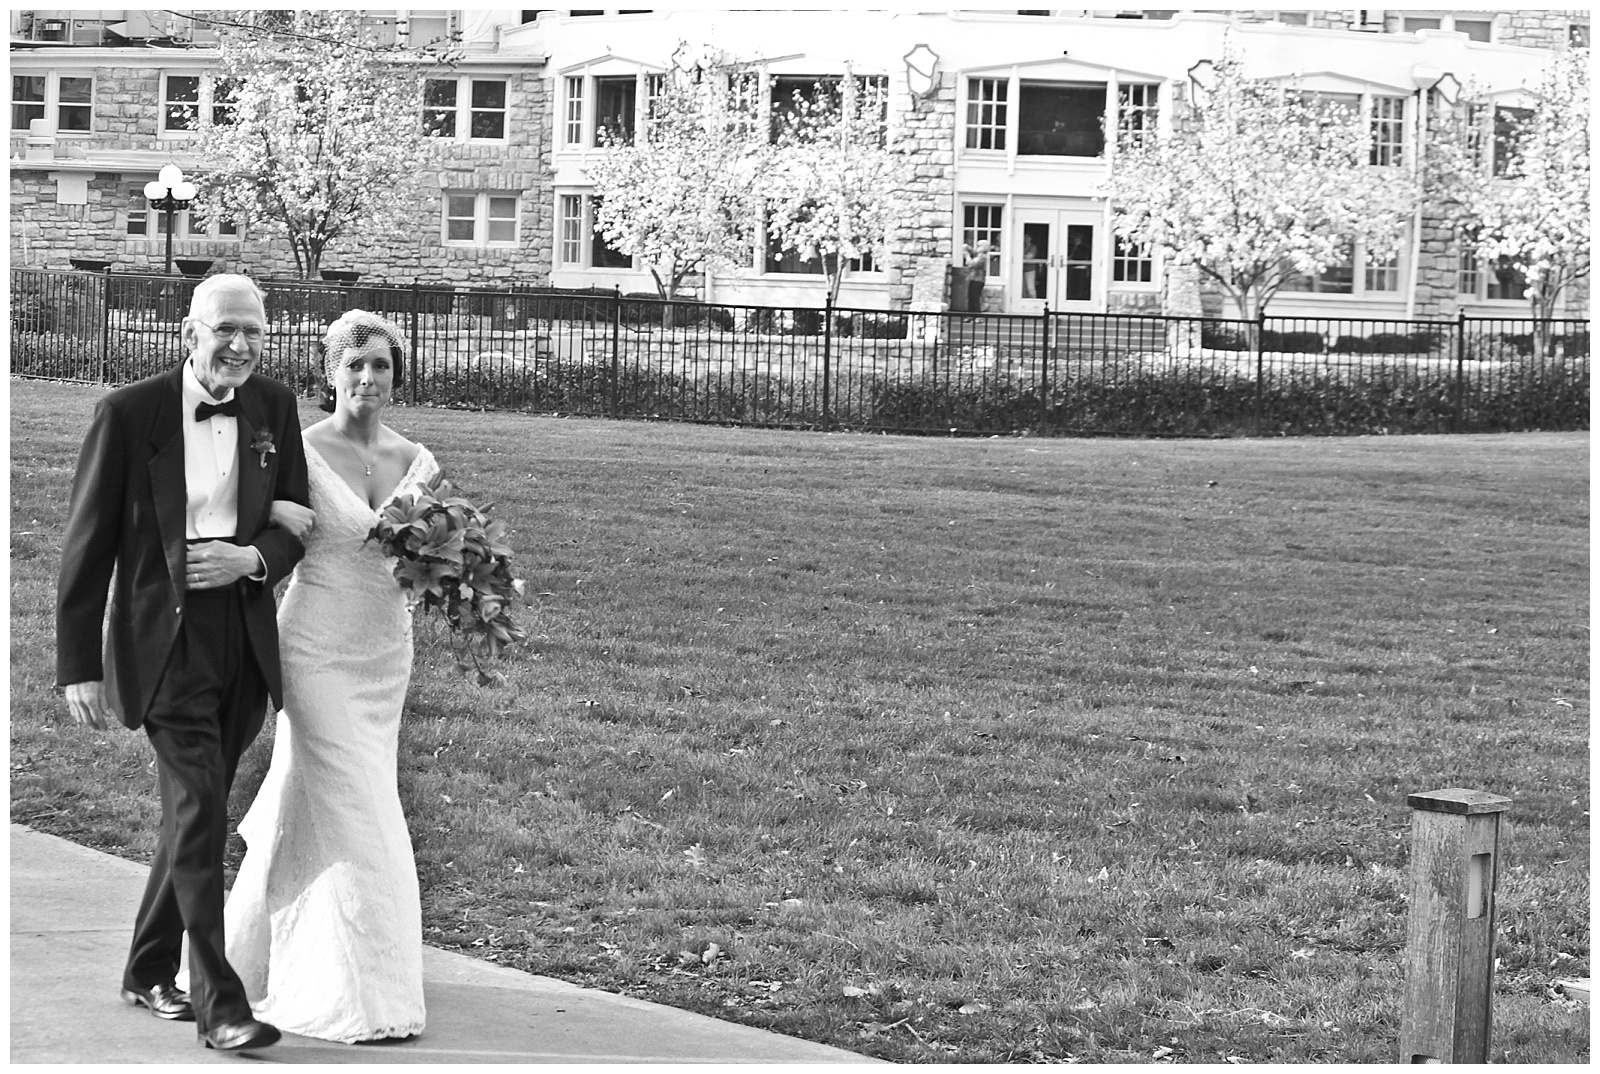 Wedding photography at The Elms Hotel and Spa in Excelsior Springs, Missouri.